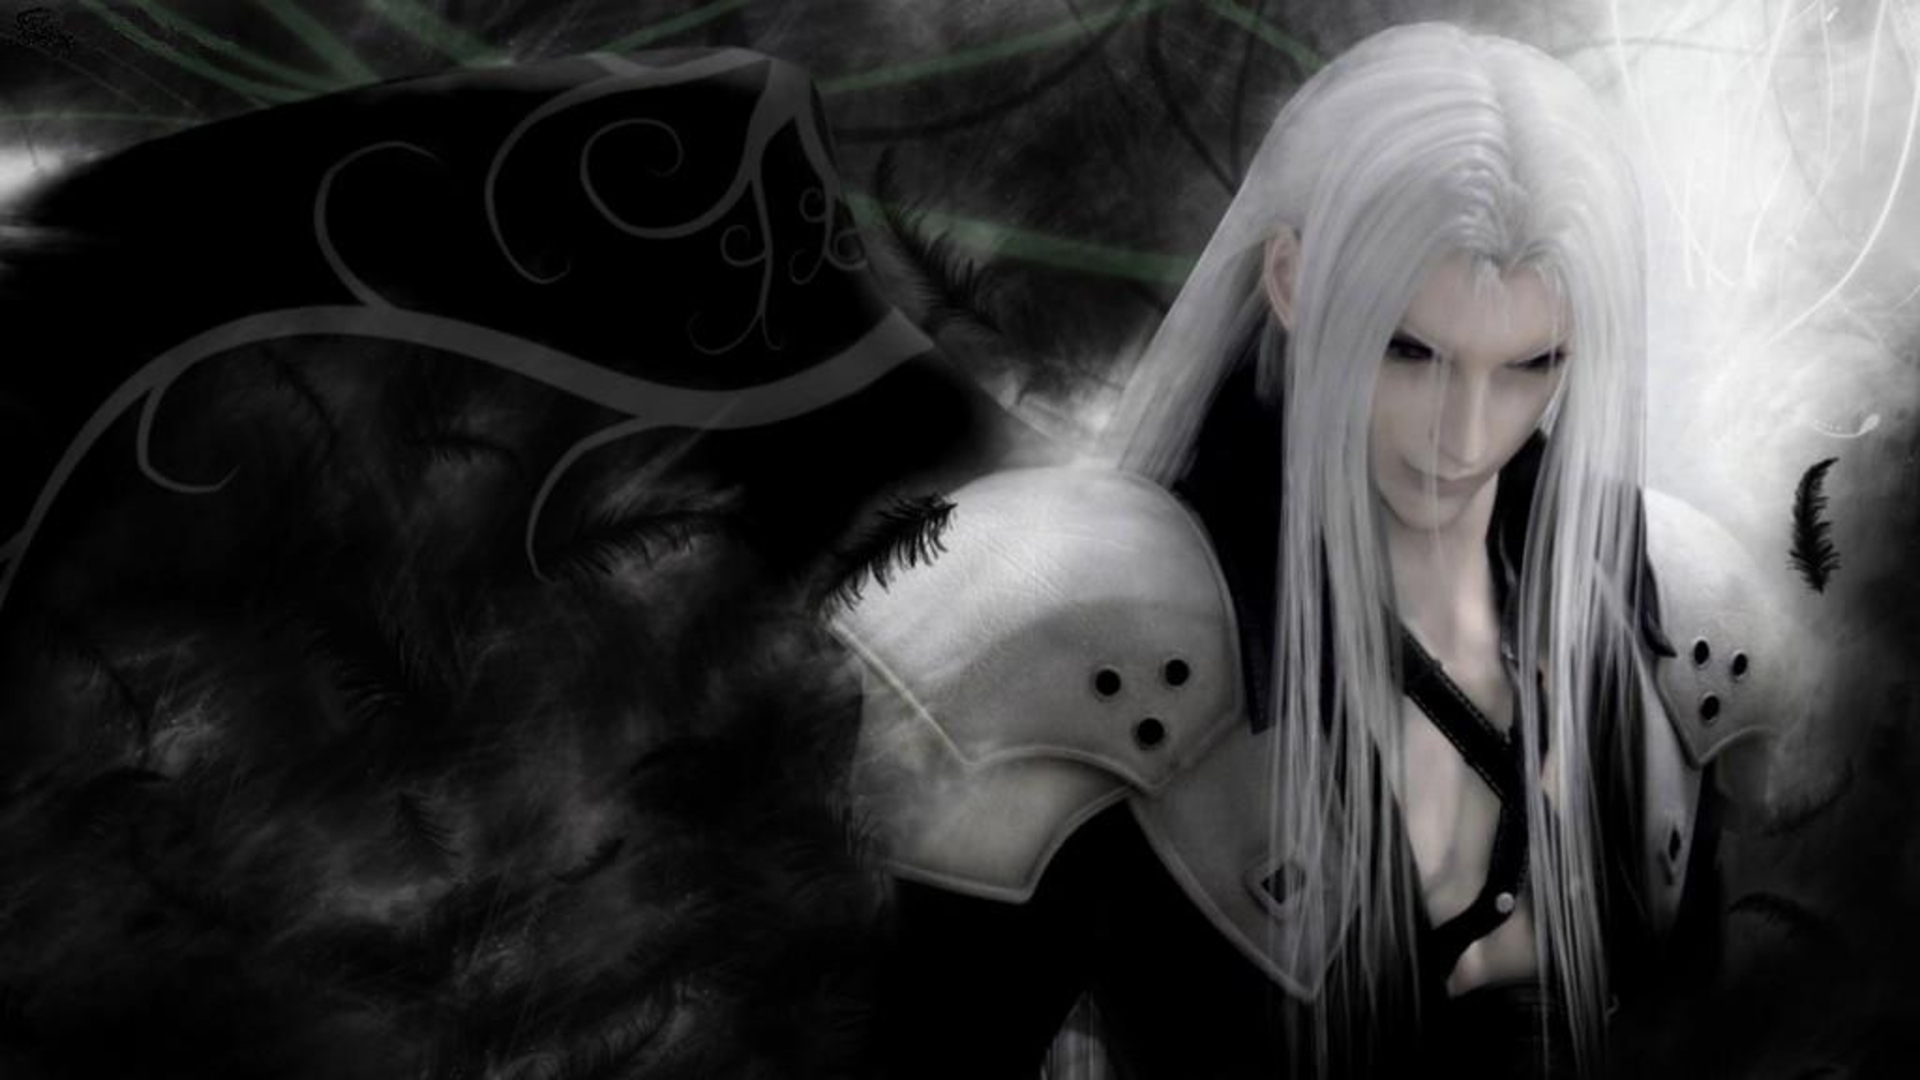 Sephiroth from Final Fantasy VII: Advent Children. A captivating anime character with intense gaze.